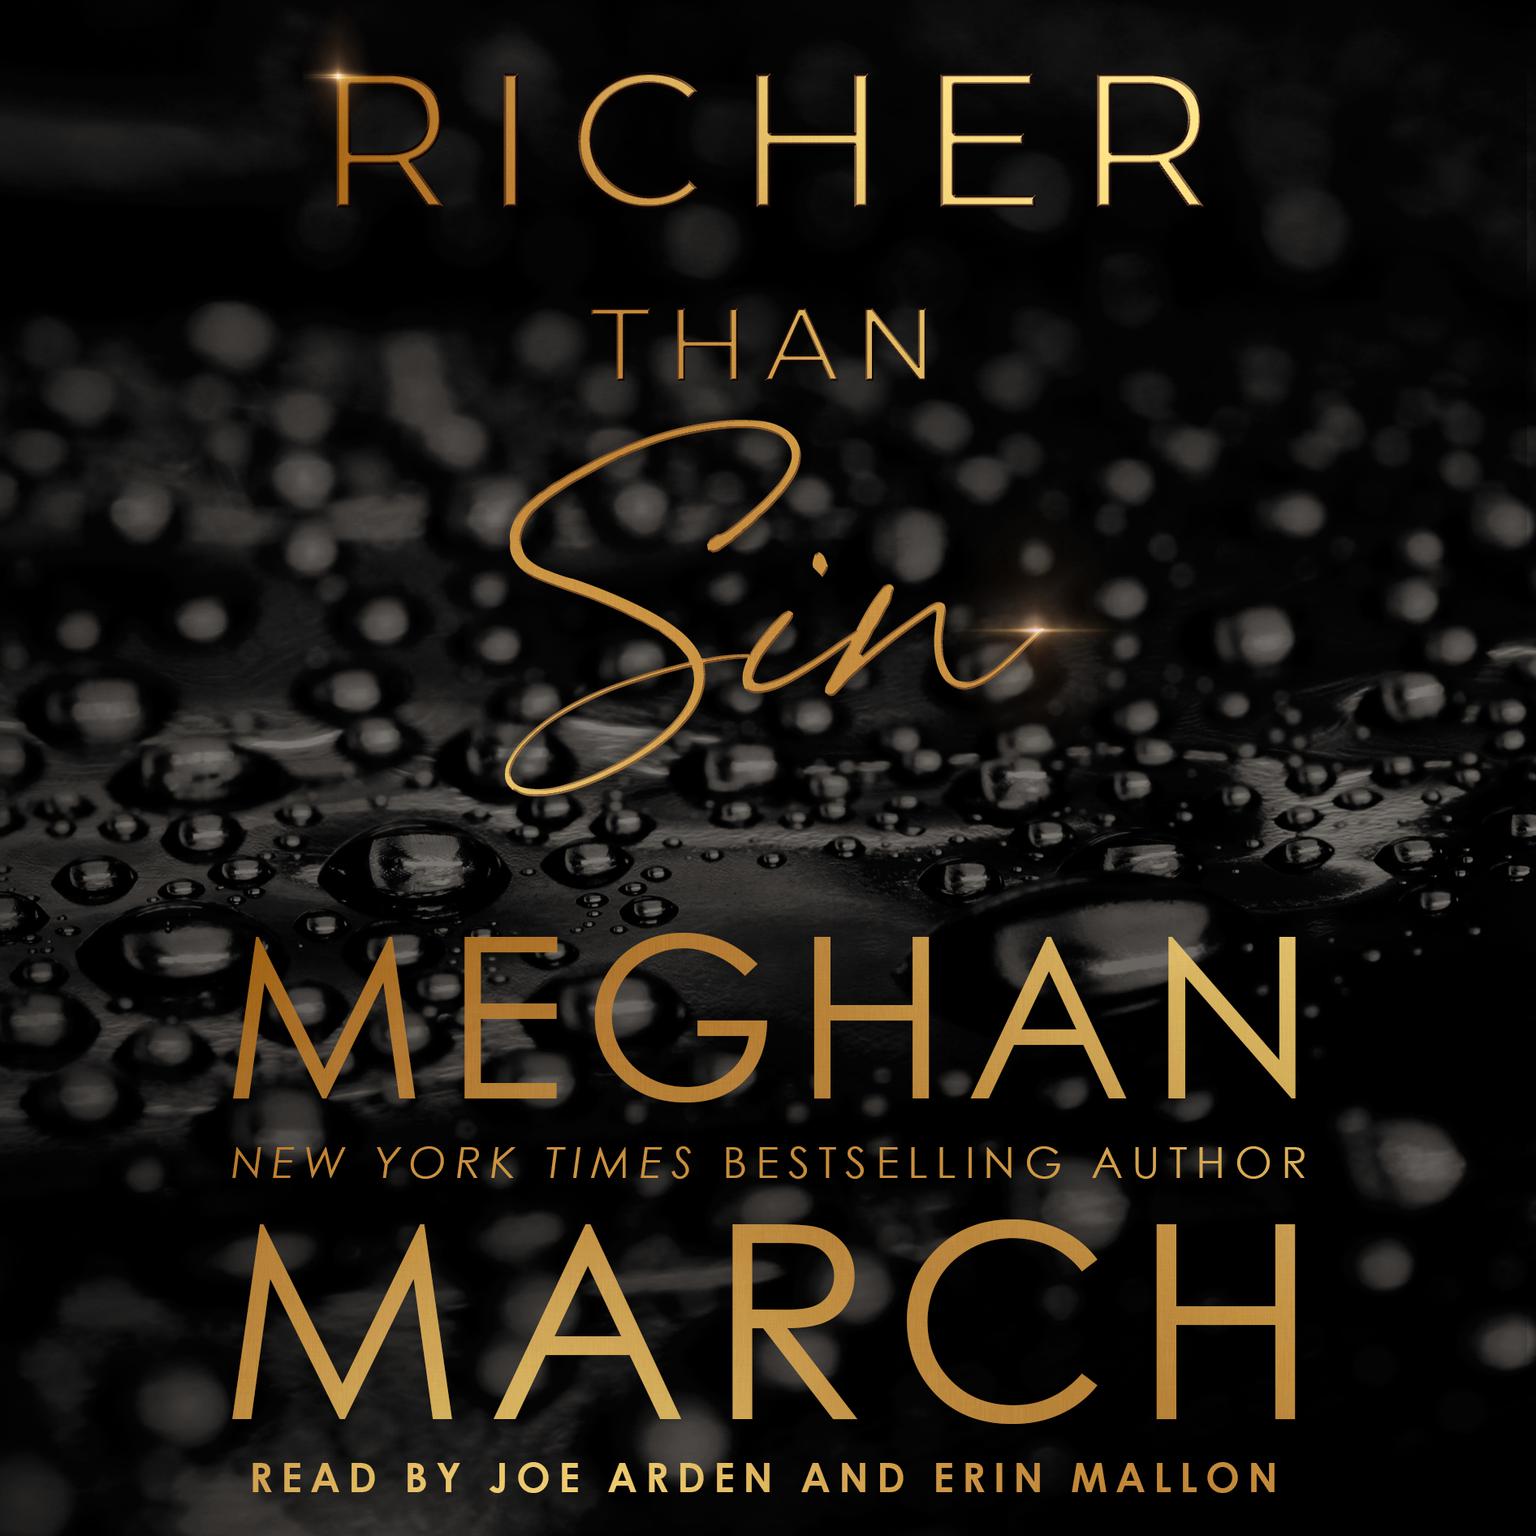 Richer Than Sin Audiobook, by Meghan March